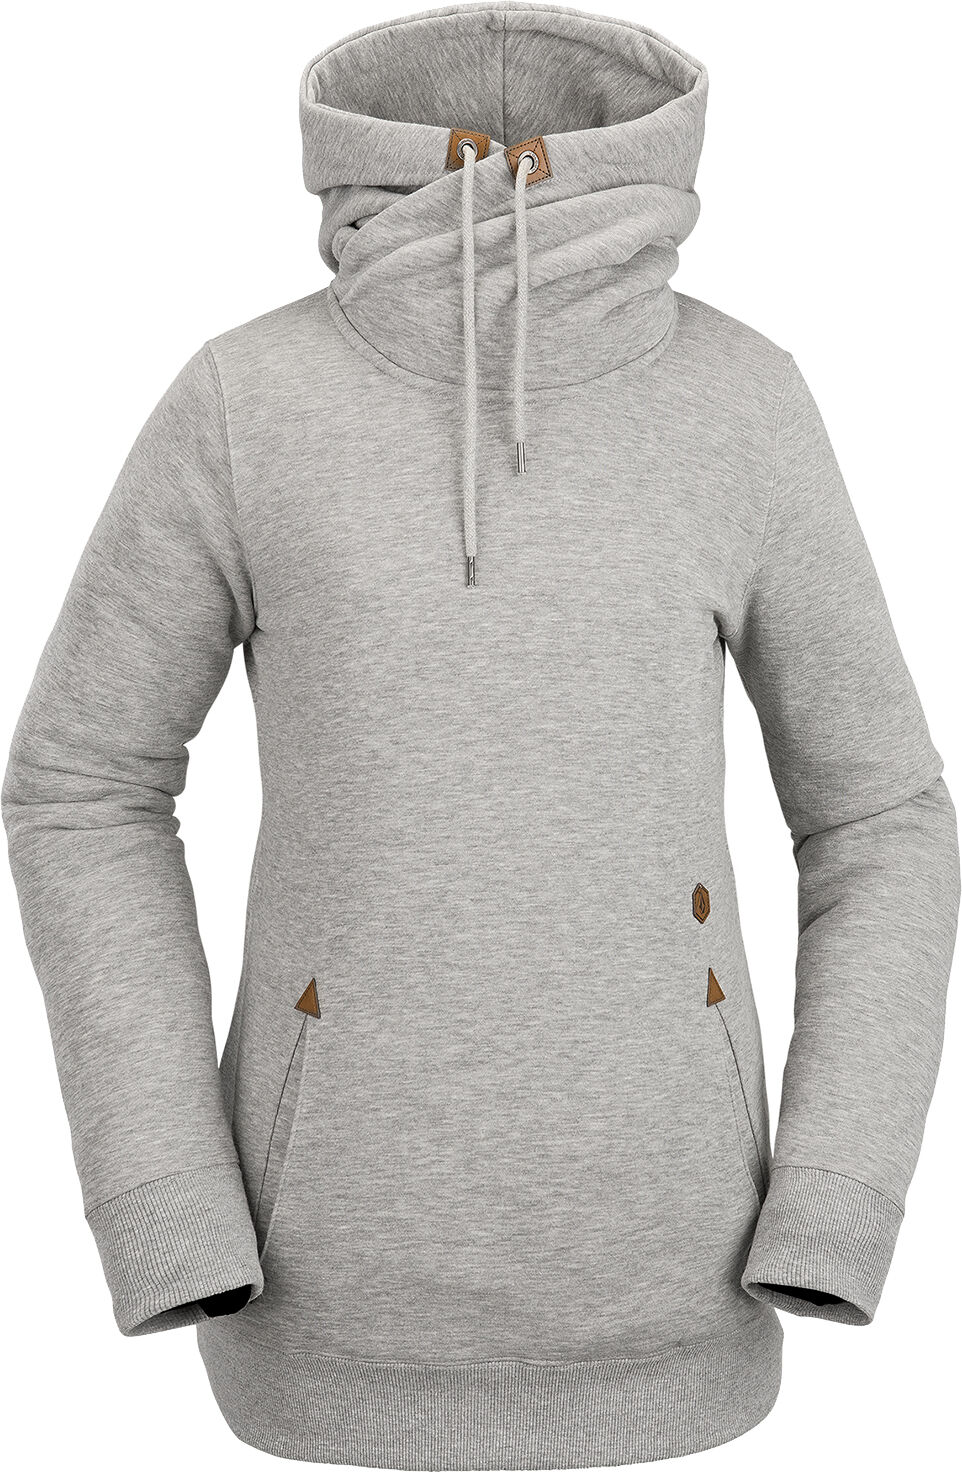 Volcom TOWER PULLOVER HEATHER GREY S